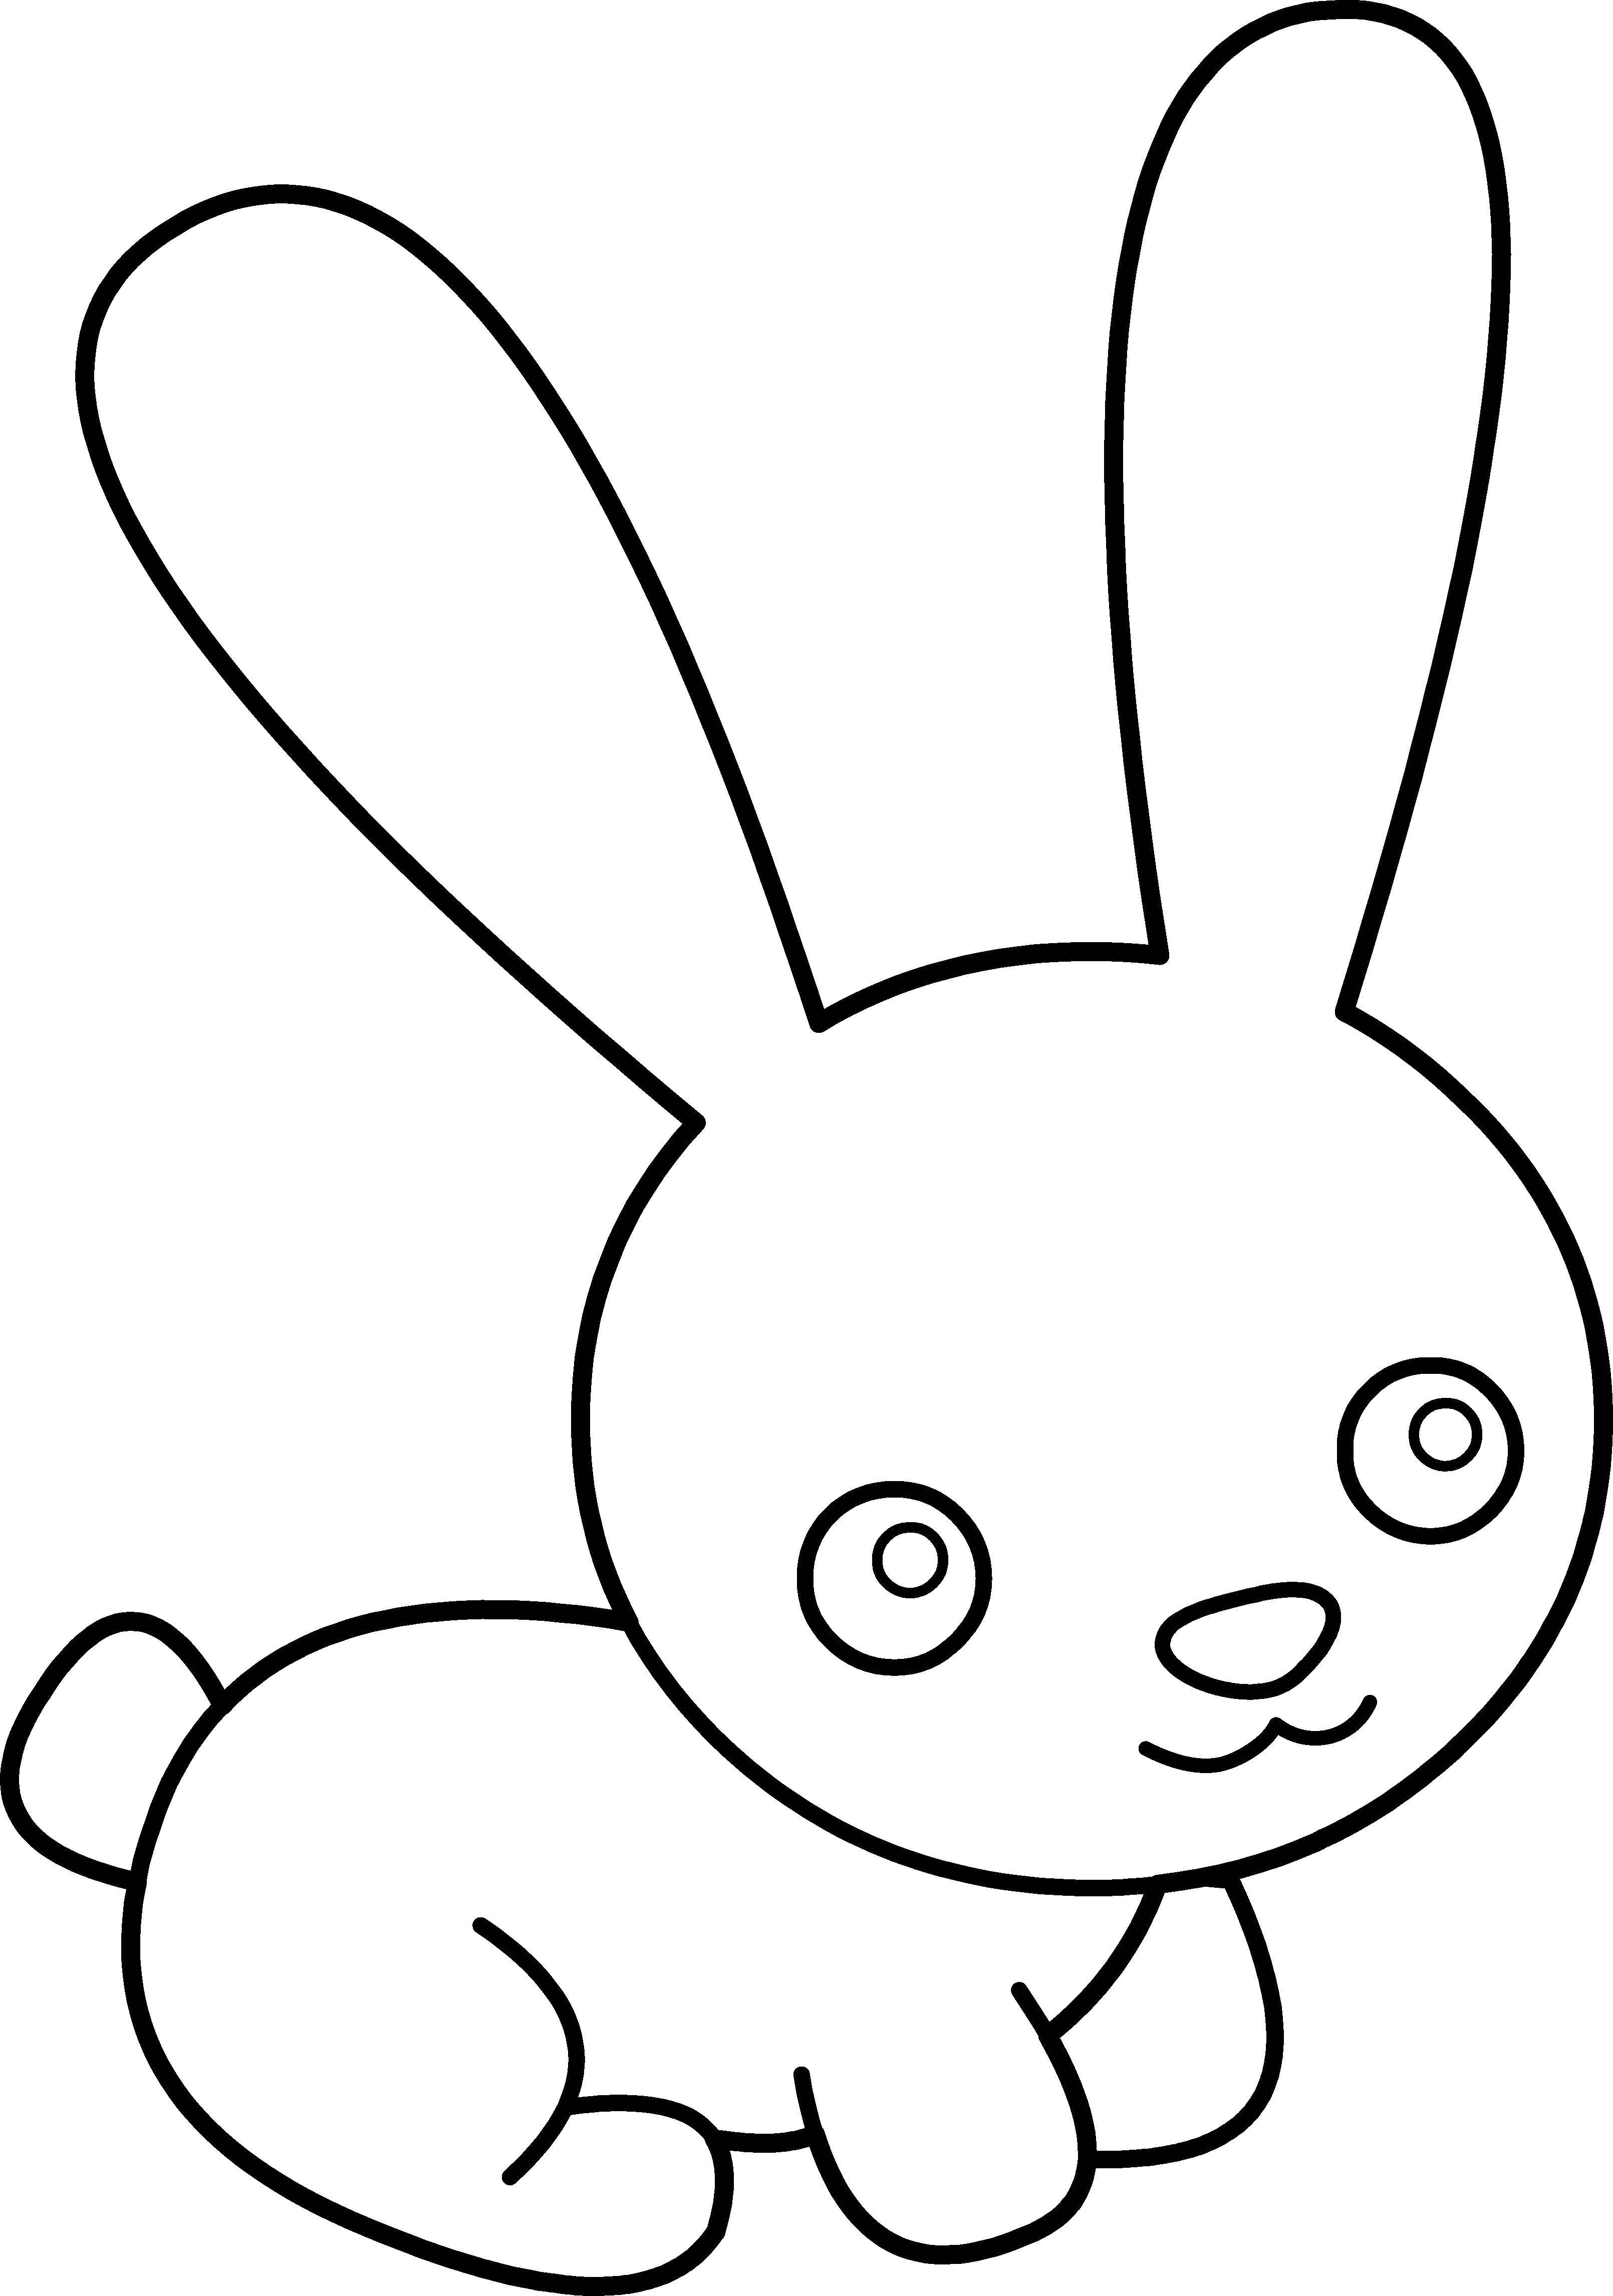 Coloring Rabbit with big ears. Category the contour of the rabbit. Tags:  hare, ears, tail.